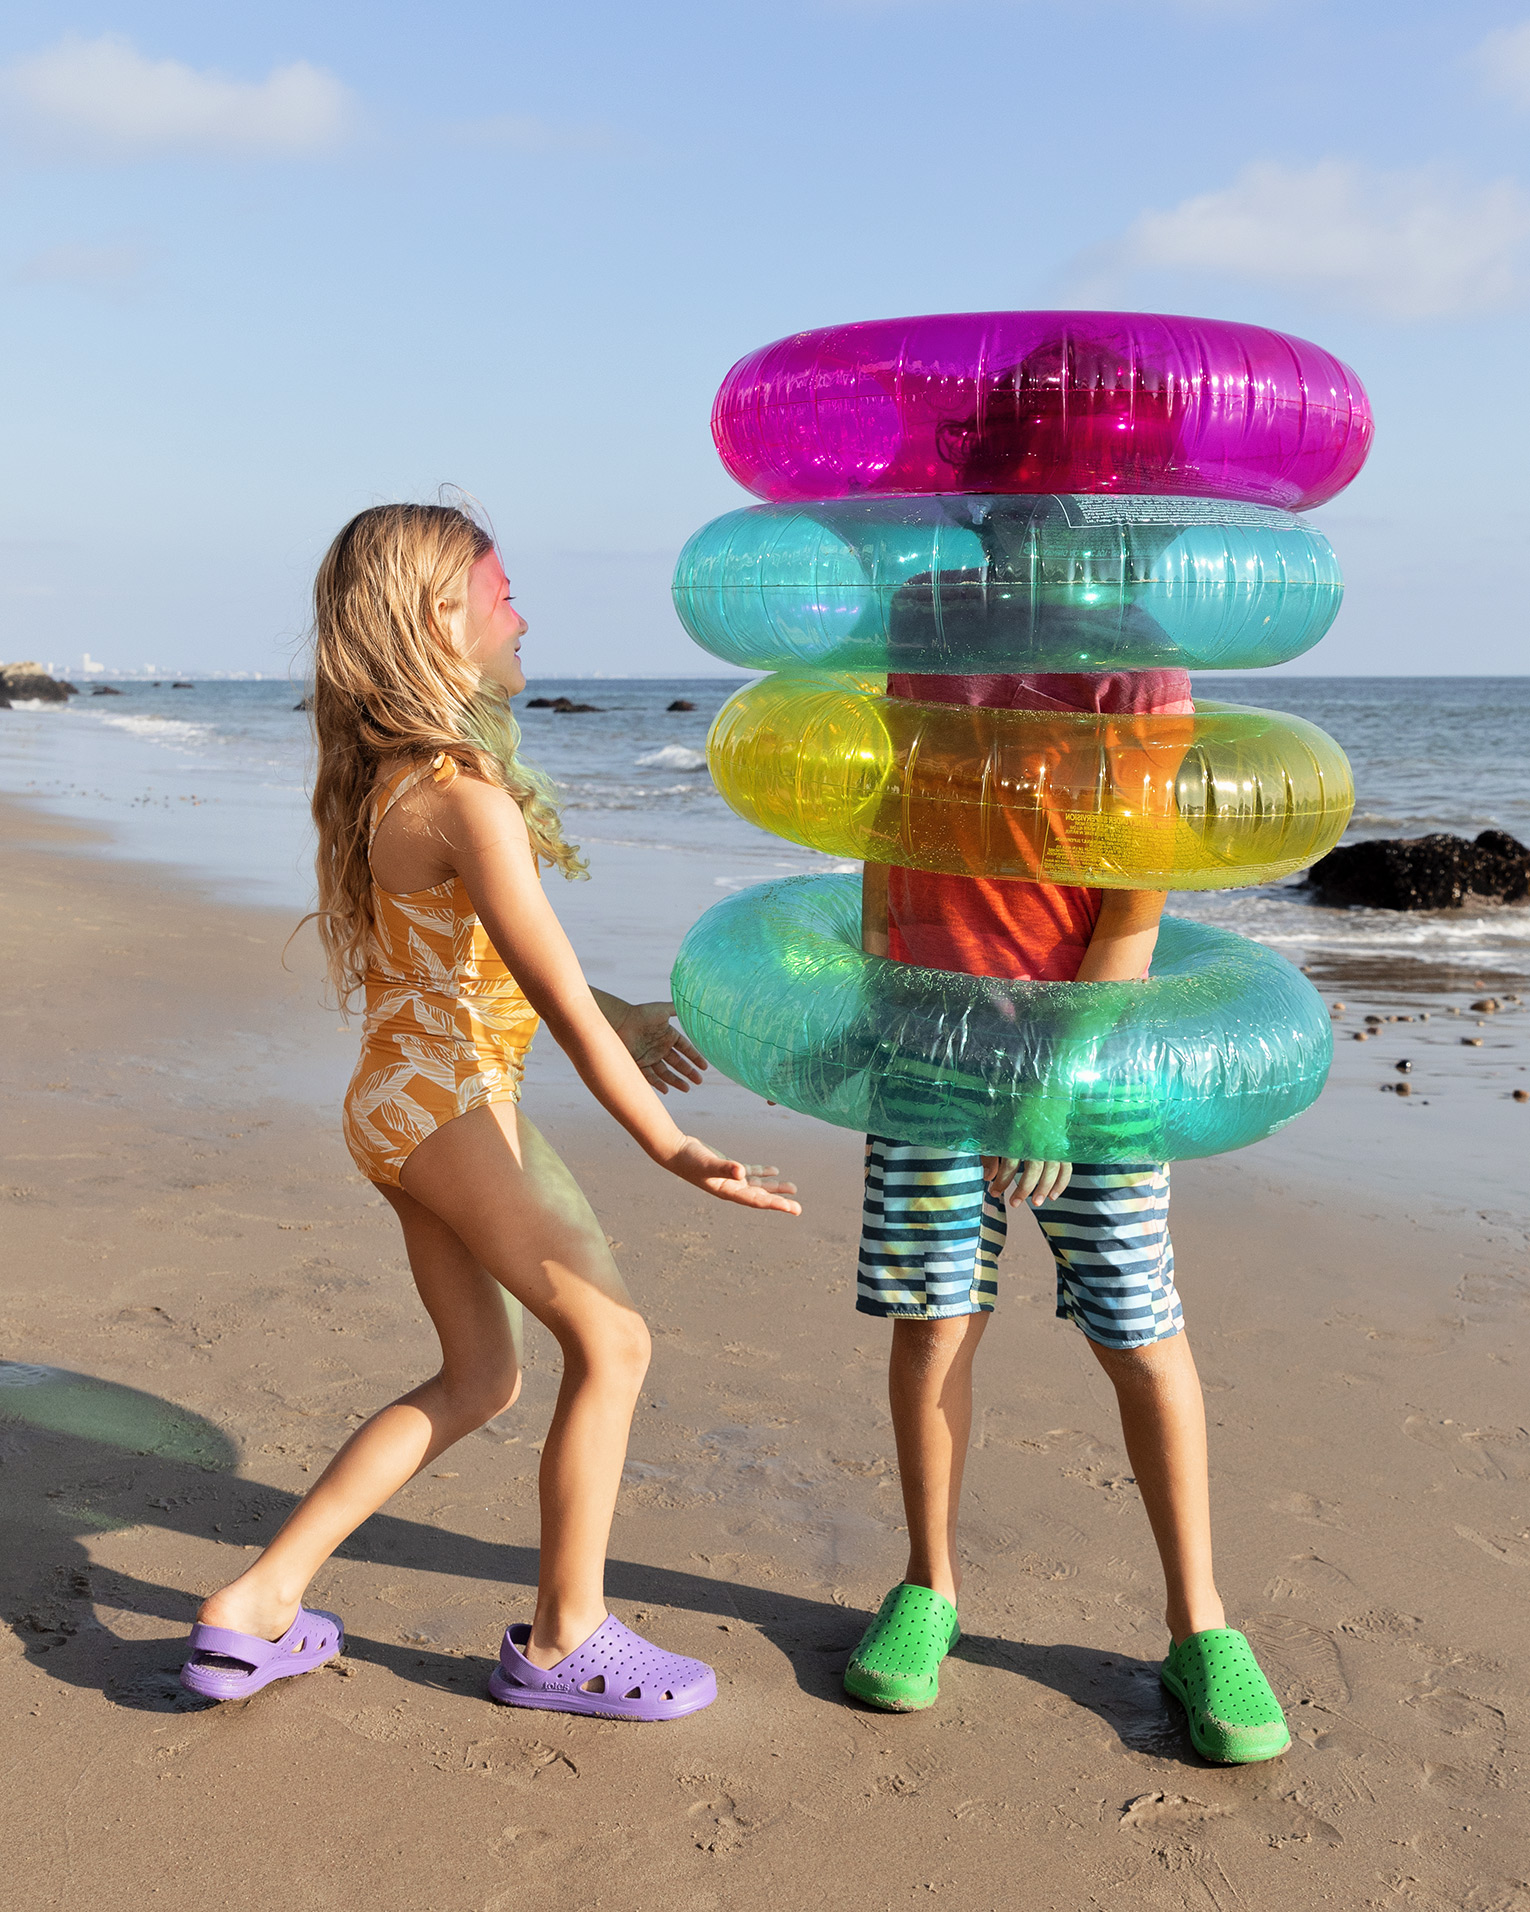 Sun-soaked beach adventure: Two kids play joyfully in Totes advertising image by Kimberly Genevieve